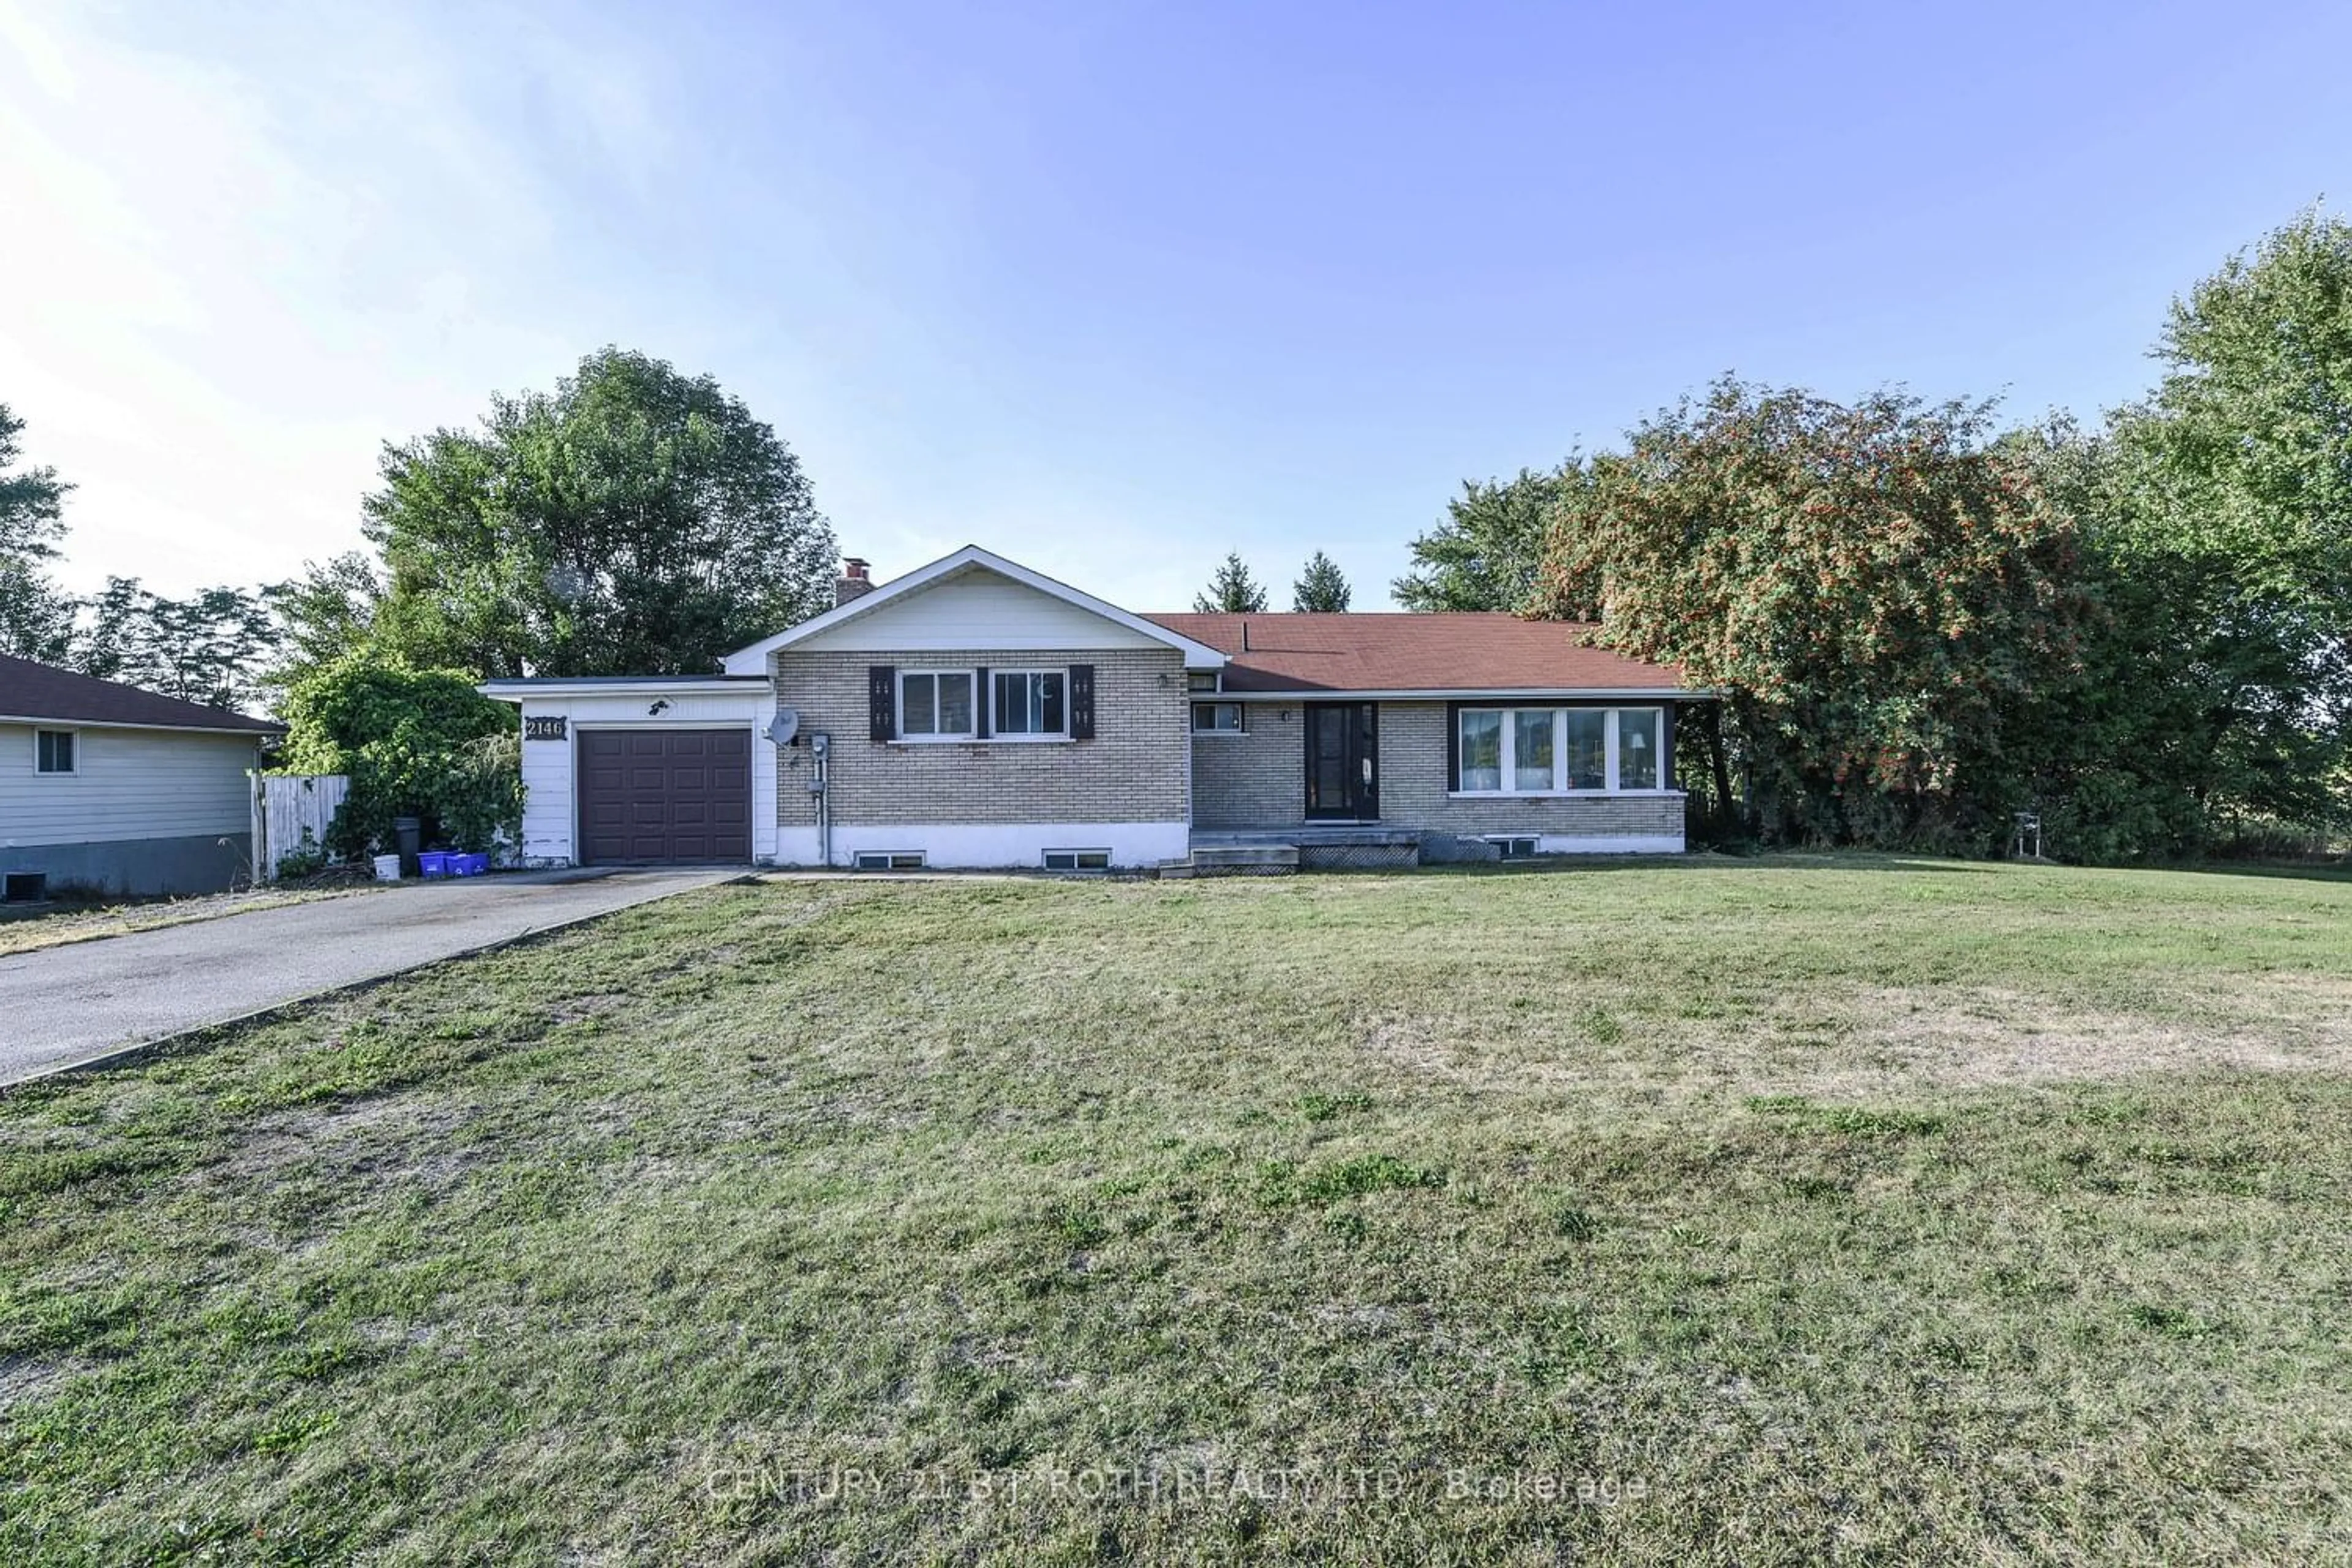 Frontside or backside of a home for 2146 Innisfil Beach Rd, Innisfil Ontario L9S 4B9